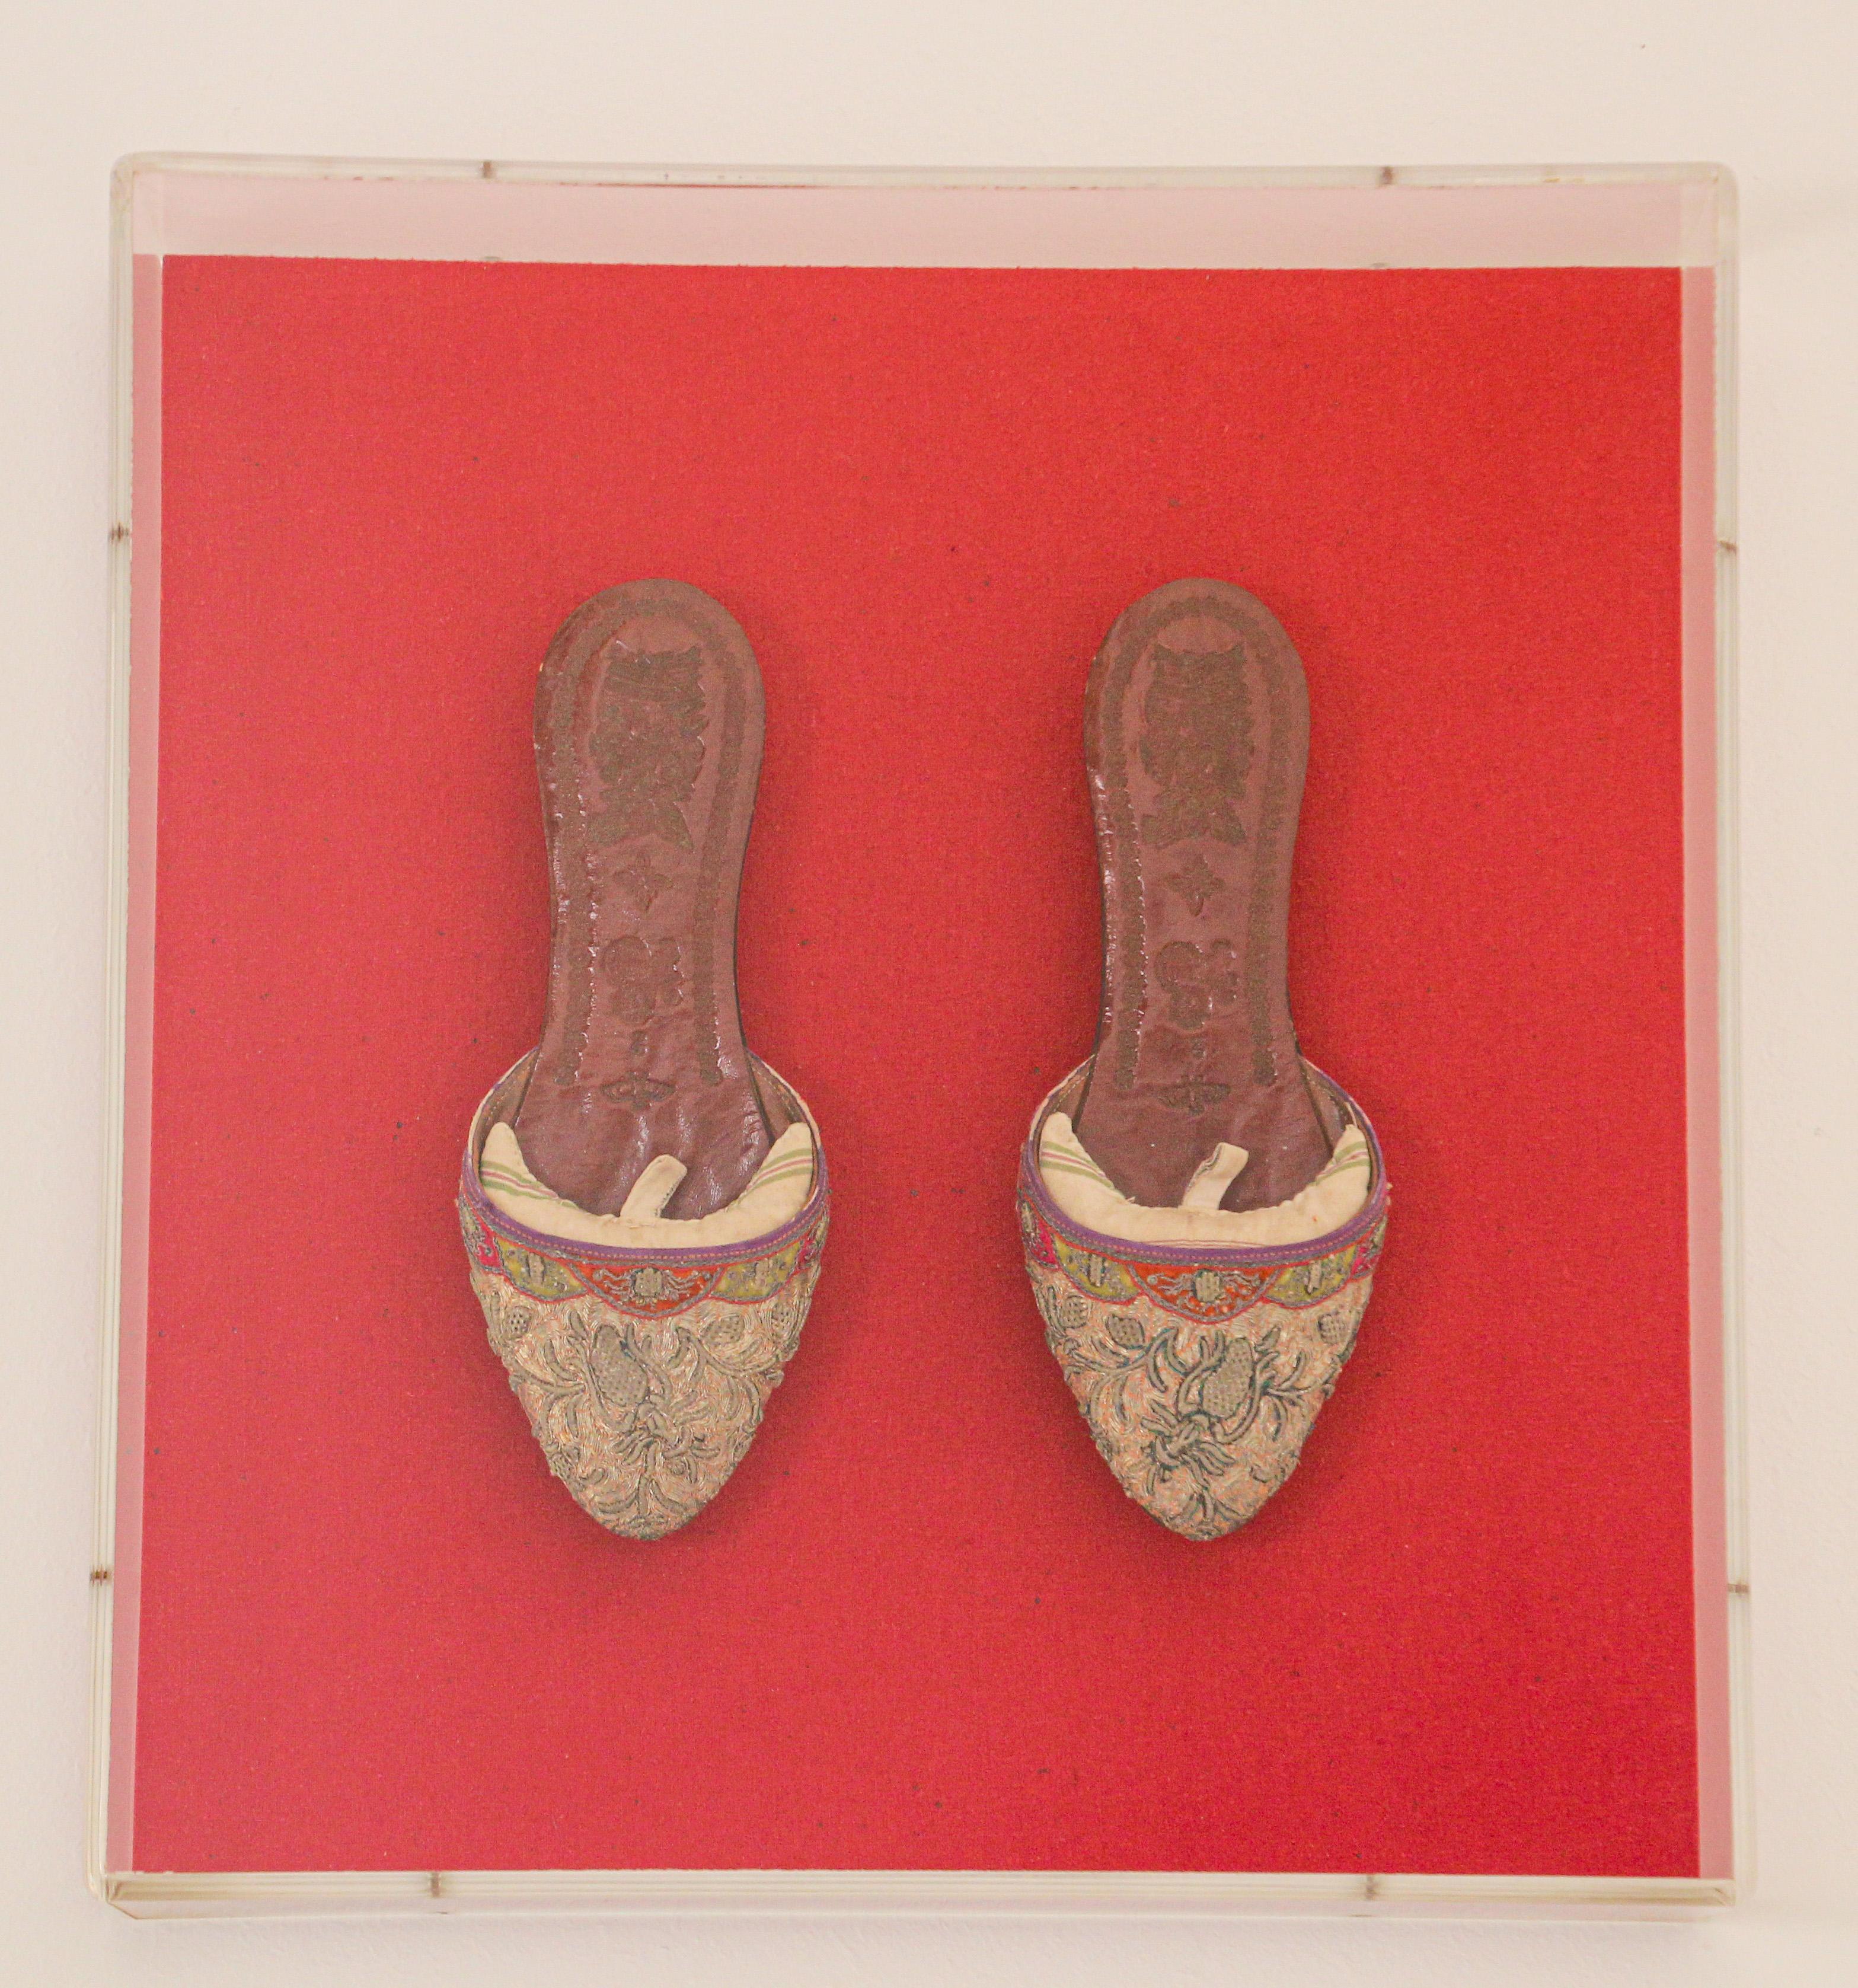 Framed in a Lucite box, pair of Asian Chinese leather and silk shoes embroidered and adorned with gold thread.
Exquisite pair of collectible antique shoes mounted and presented on a red background.
Great Asian framed Textile Collectible Wall Art.